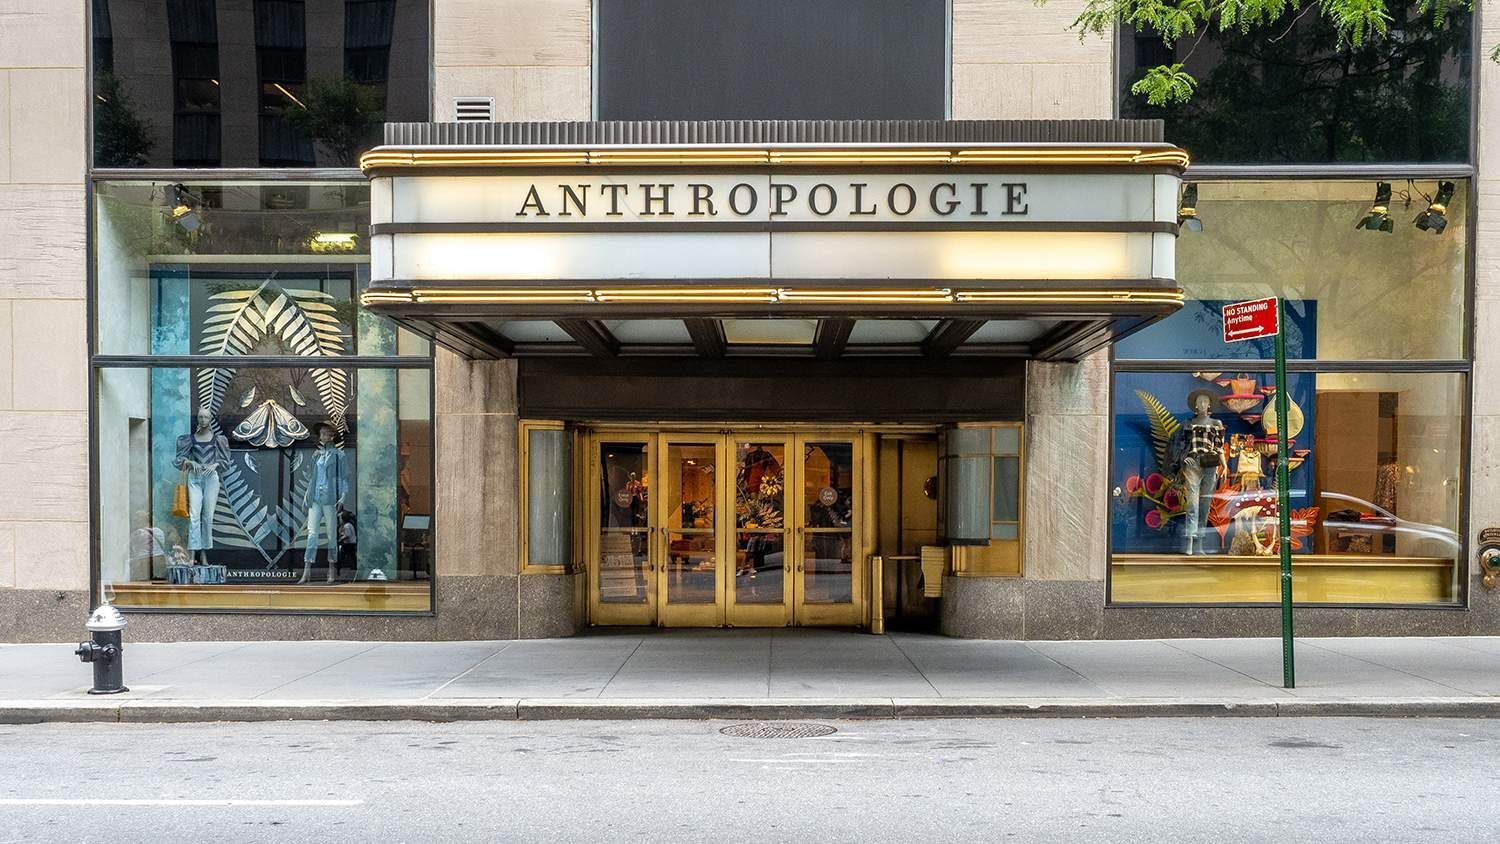 the entrance to the anthropologie store in new york city